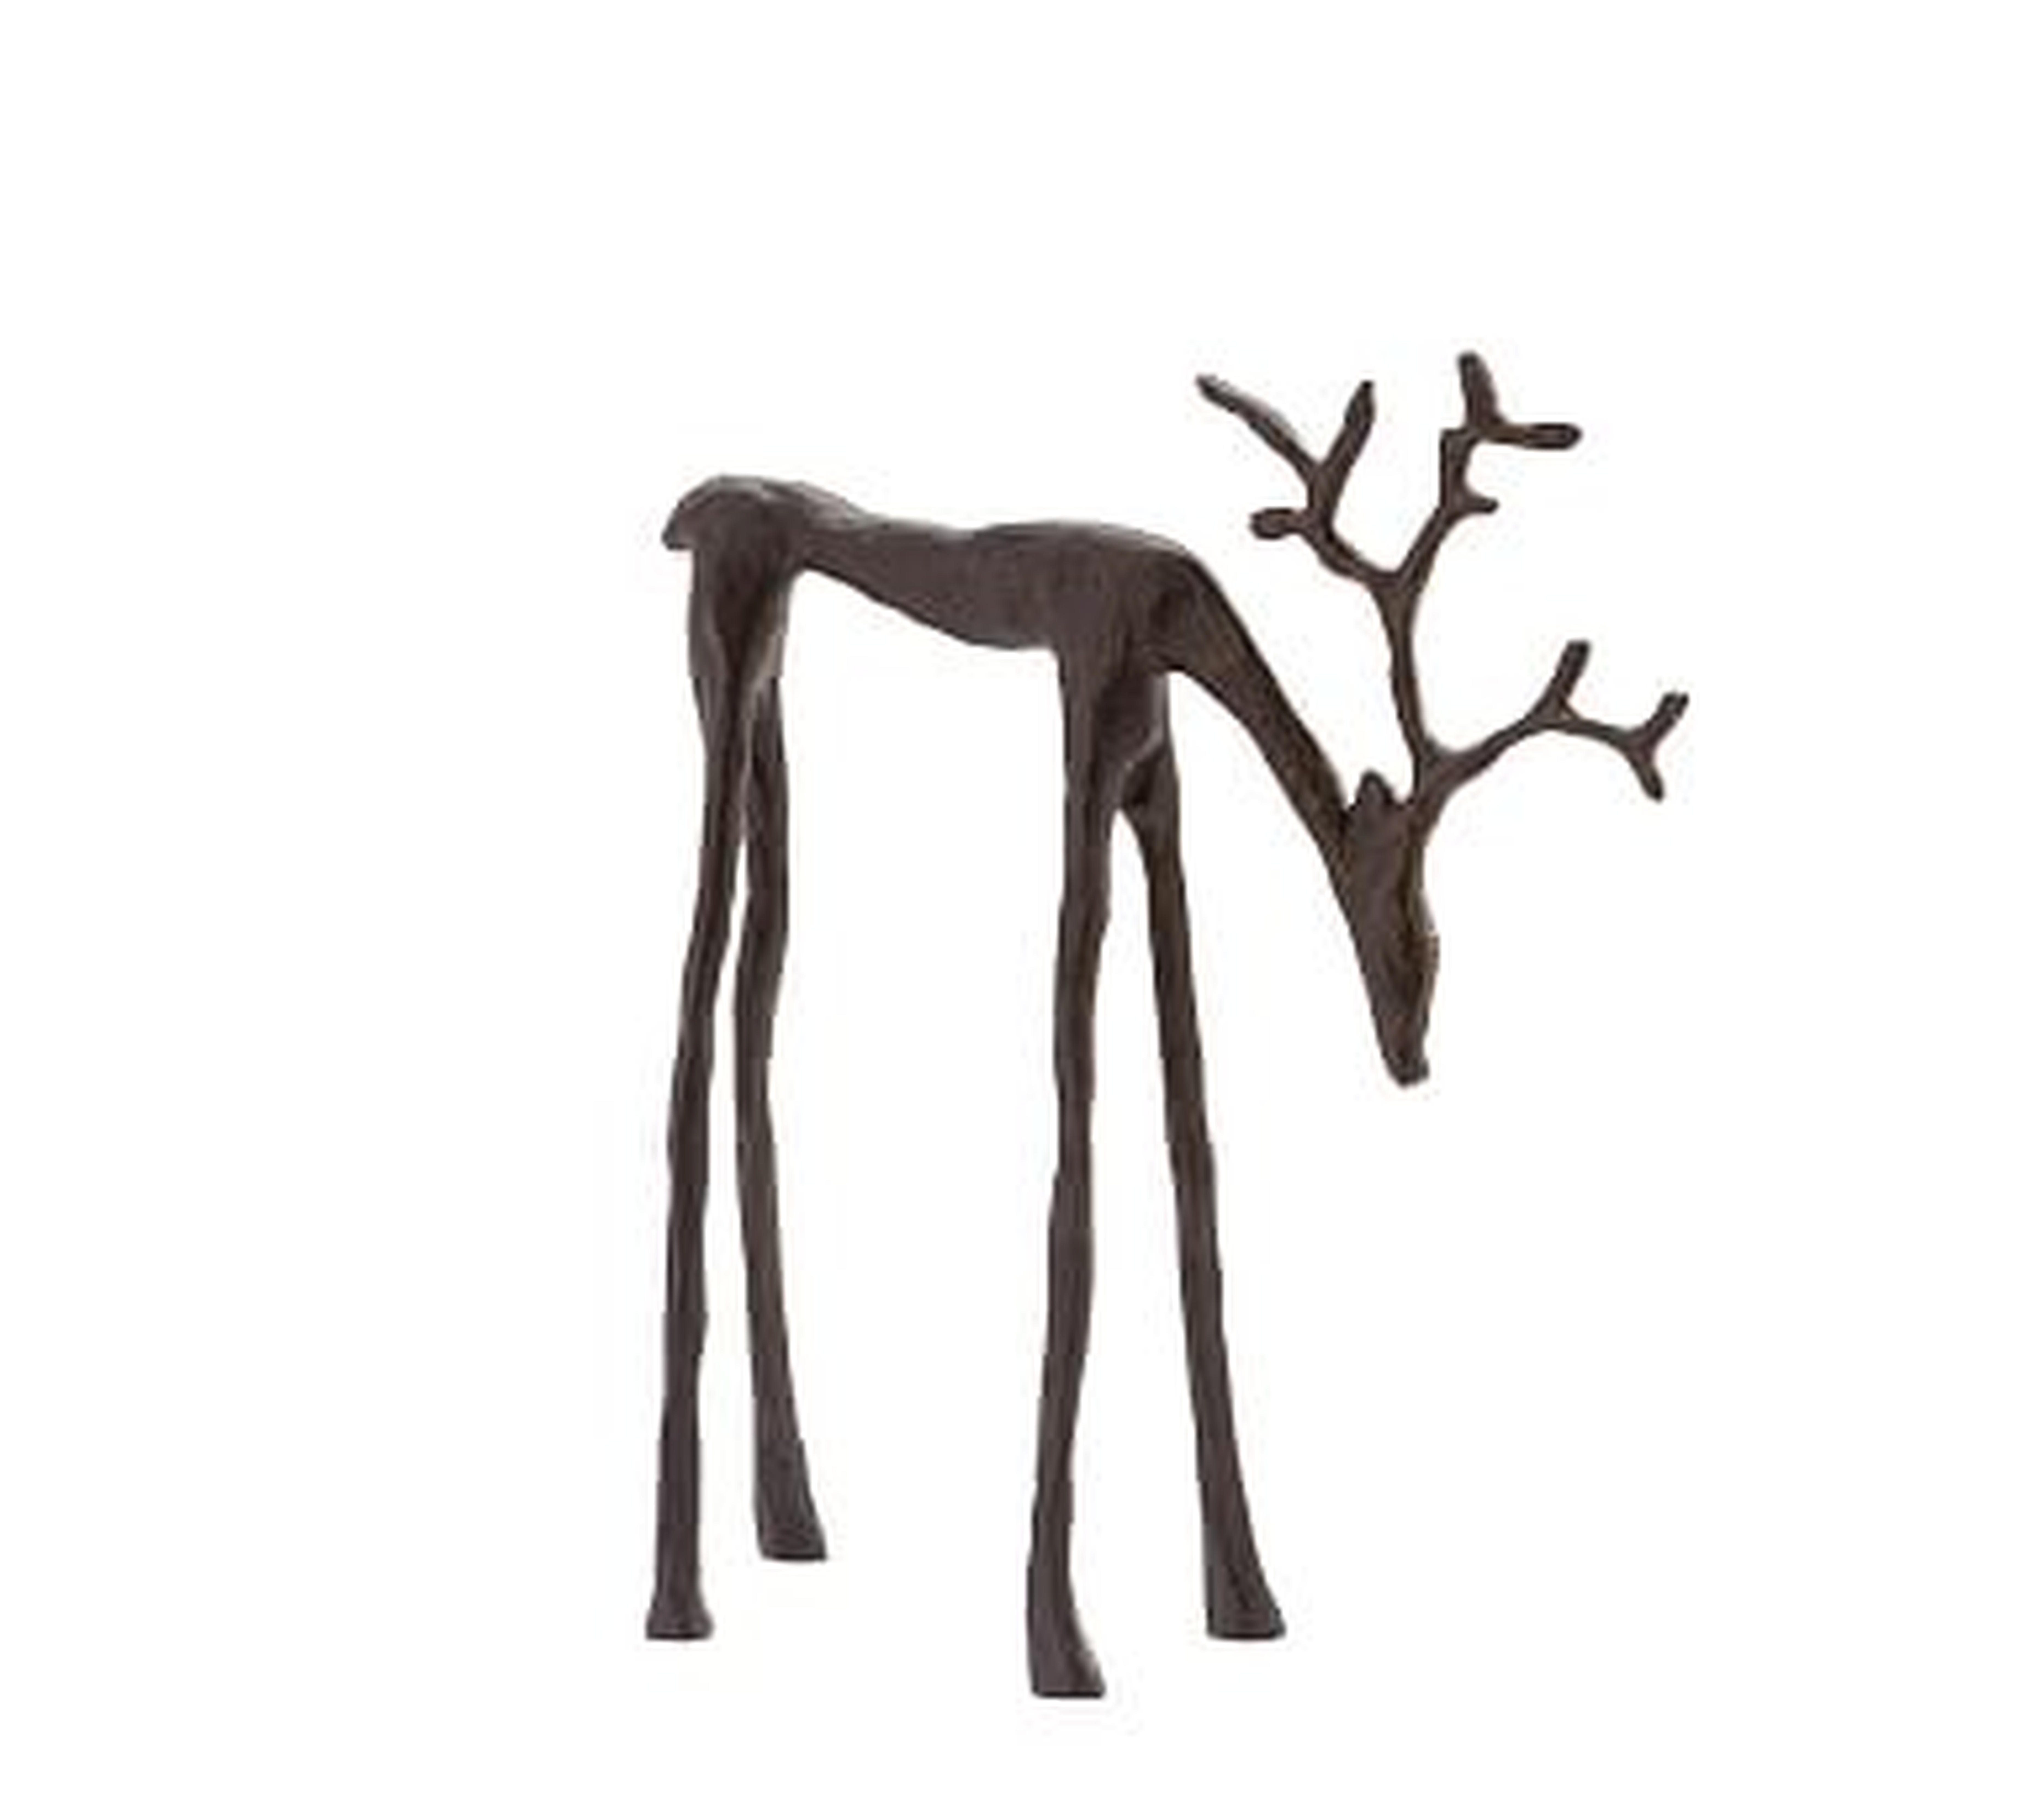 Sculpted Reindeer Object, Small, Antique Bronze - Pottery Barn